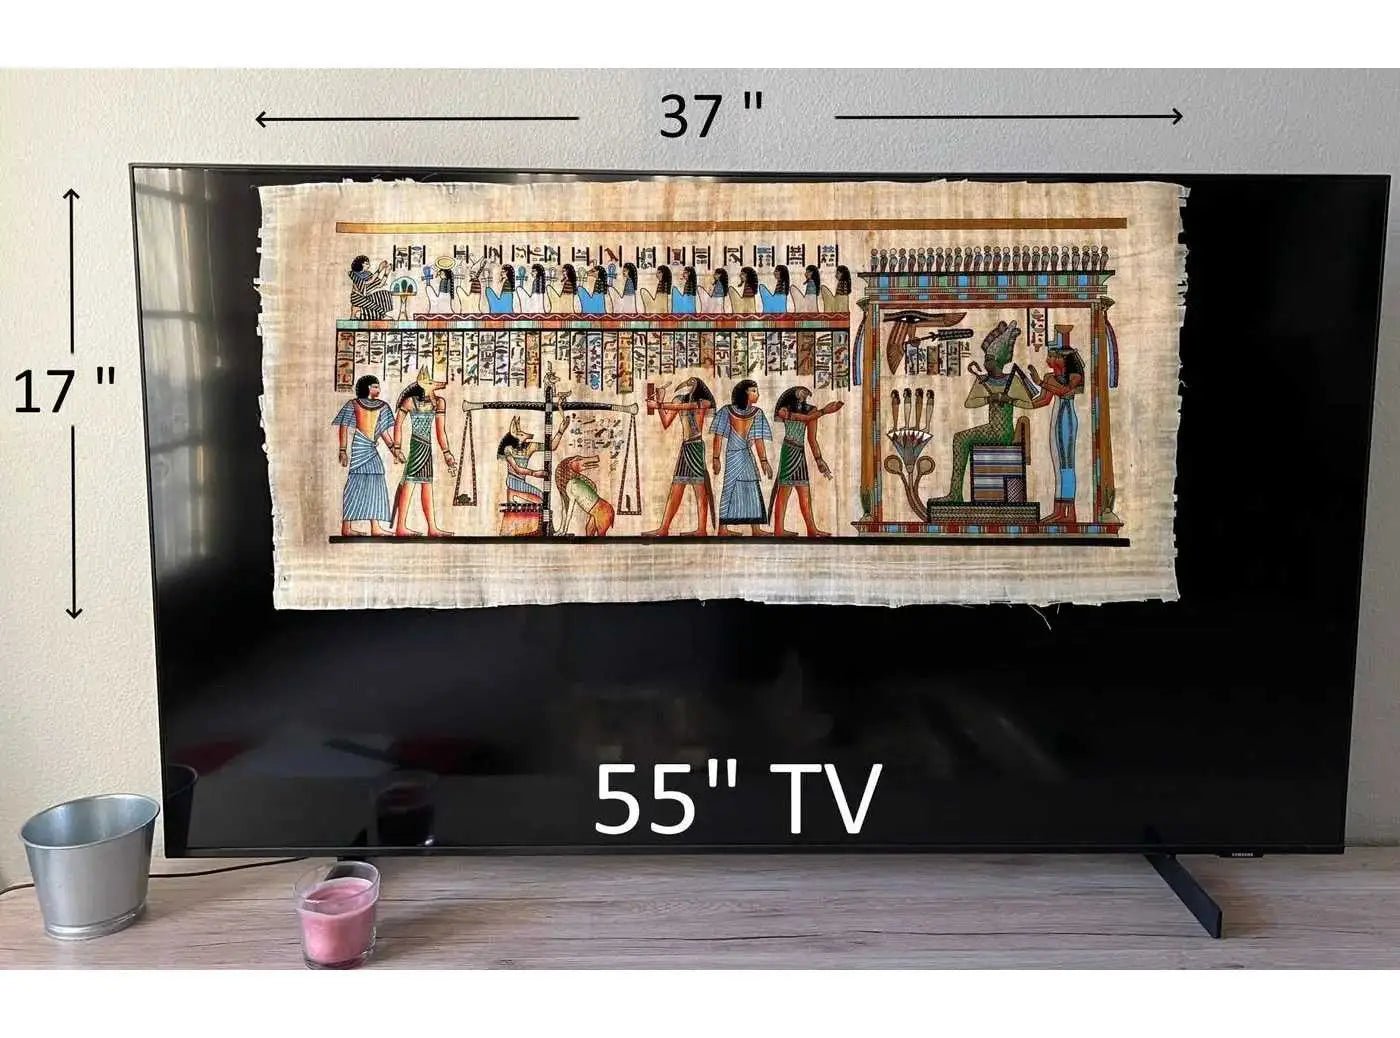 Last Judgement of Hunefer from His Tomb The Book of the Dead Hand Painted on Papyrus Extra Large Home & Office Wall Decor